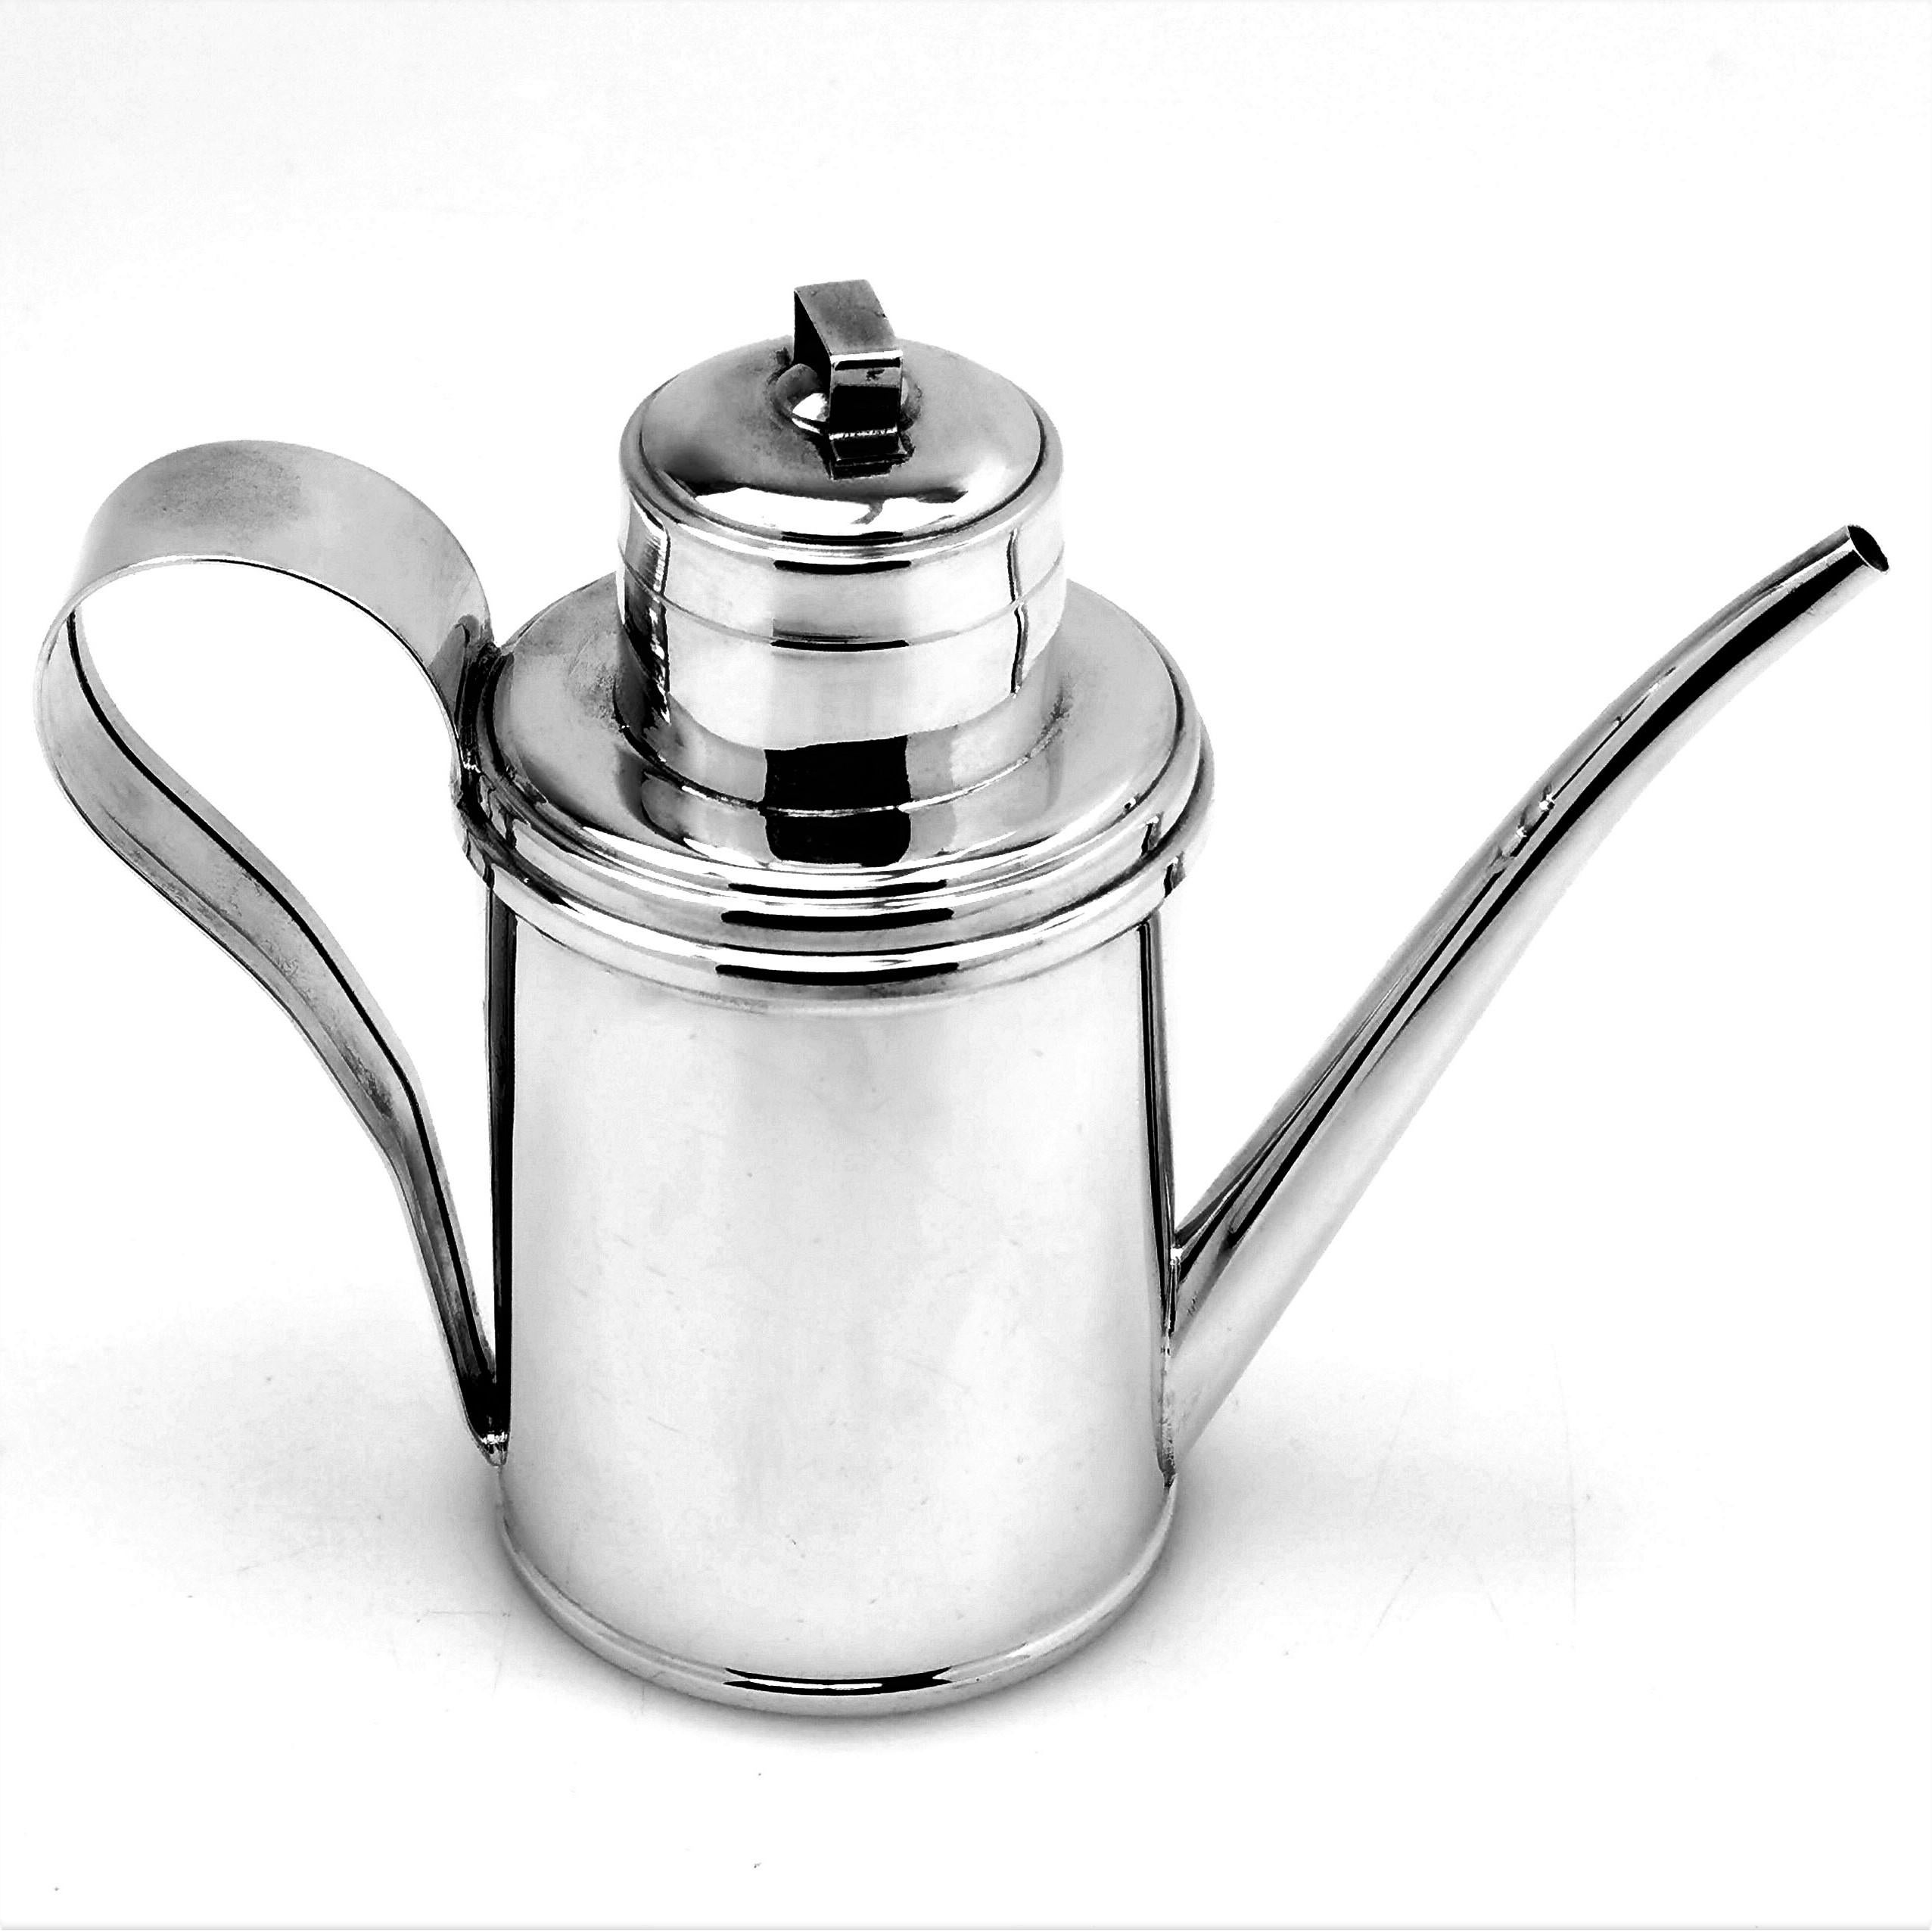 A stylish vintage Italian solid Silver Olive Oil Jug with an understated elegant design. This Olive Oil Drizzler has a classic can shaped body and an long tapered spout with a push fit lid. 

Made in Italy in circa 1960.

Approx. Weight - 264g /